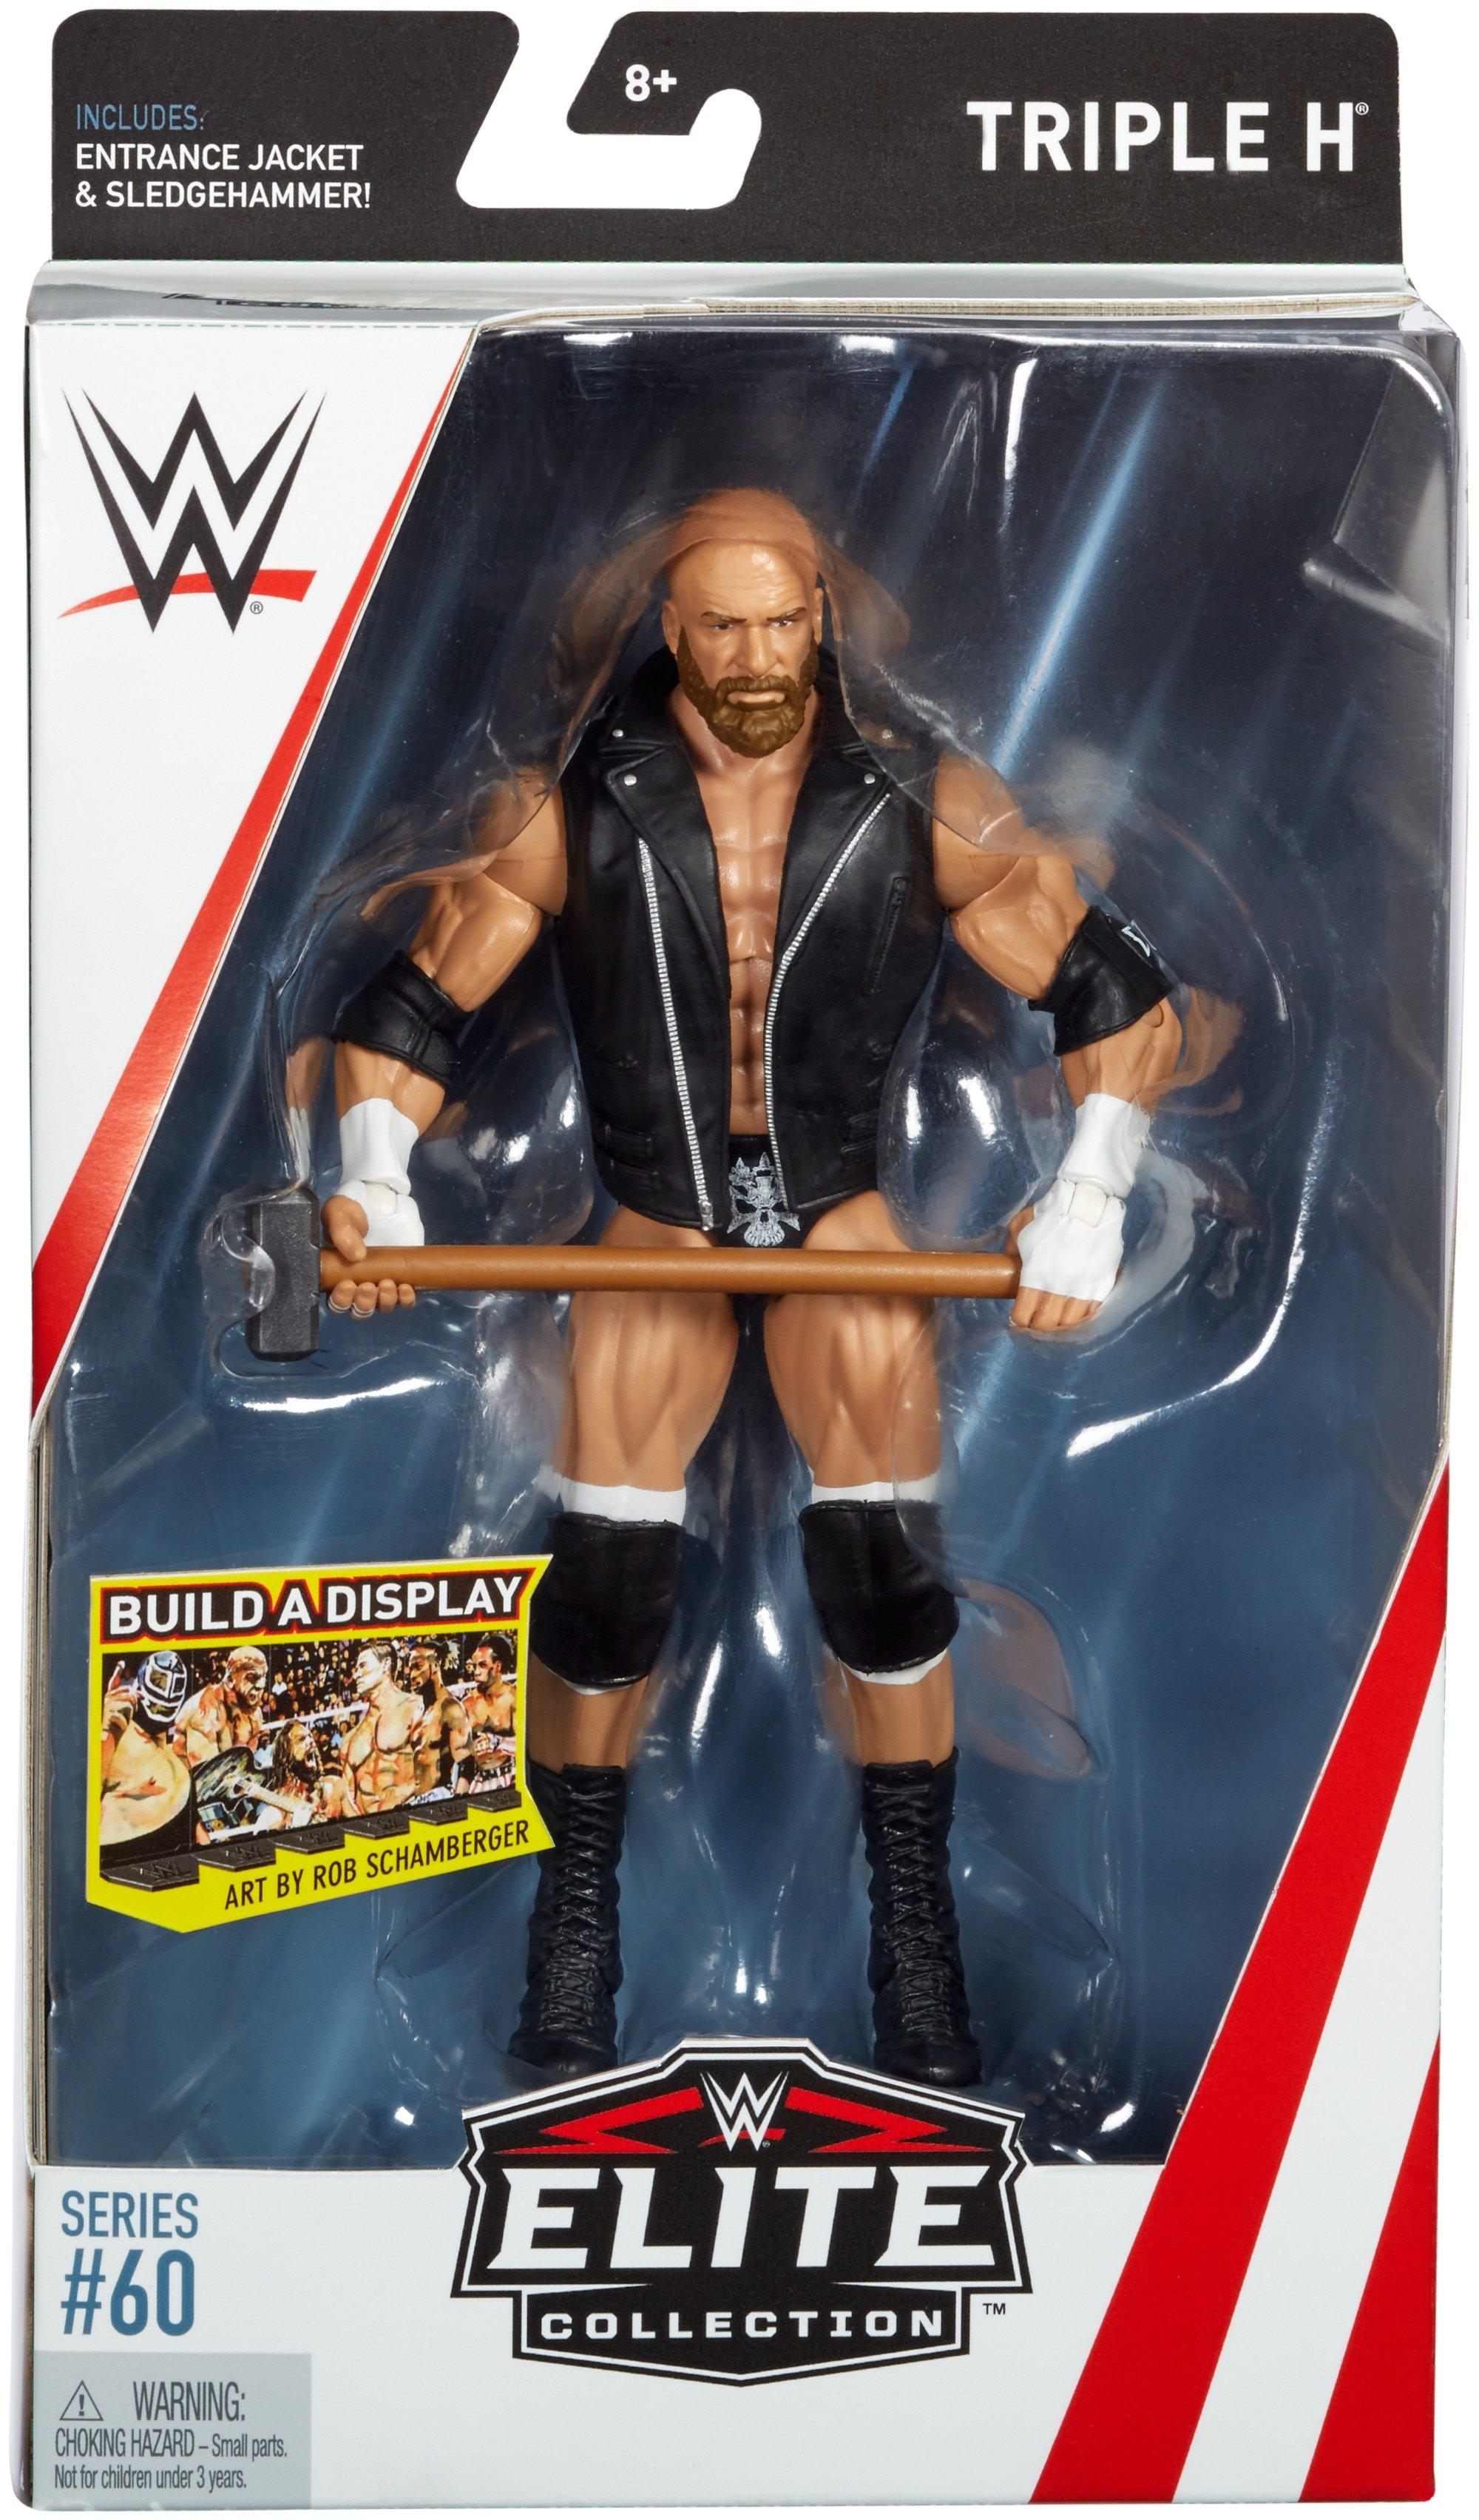 stores that sell wwe action figures